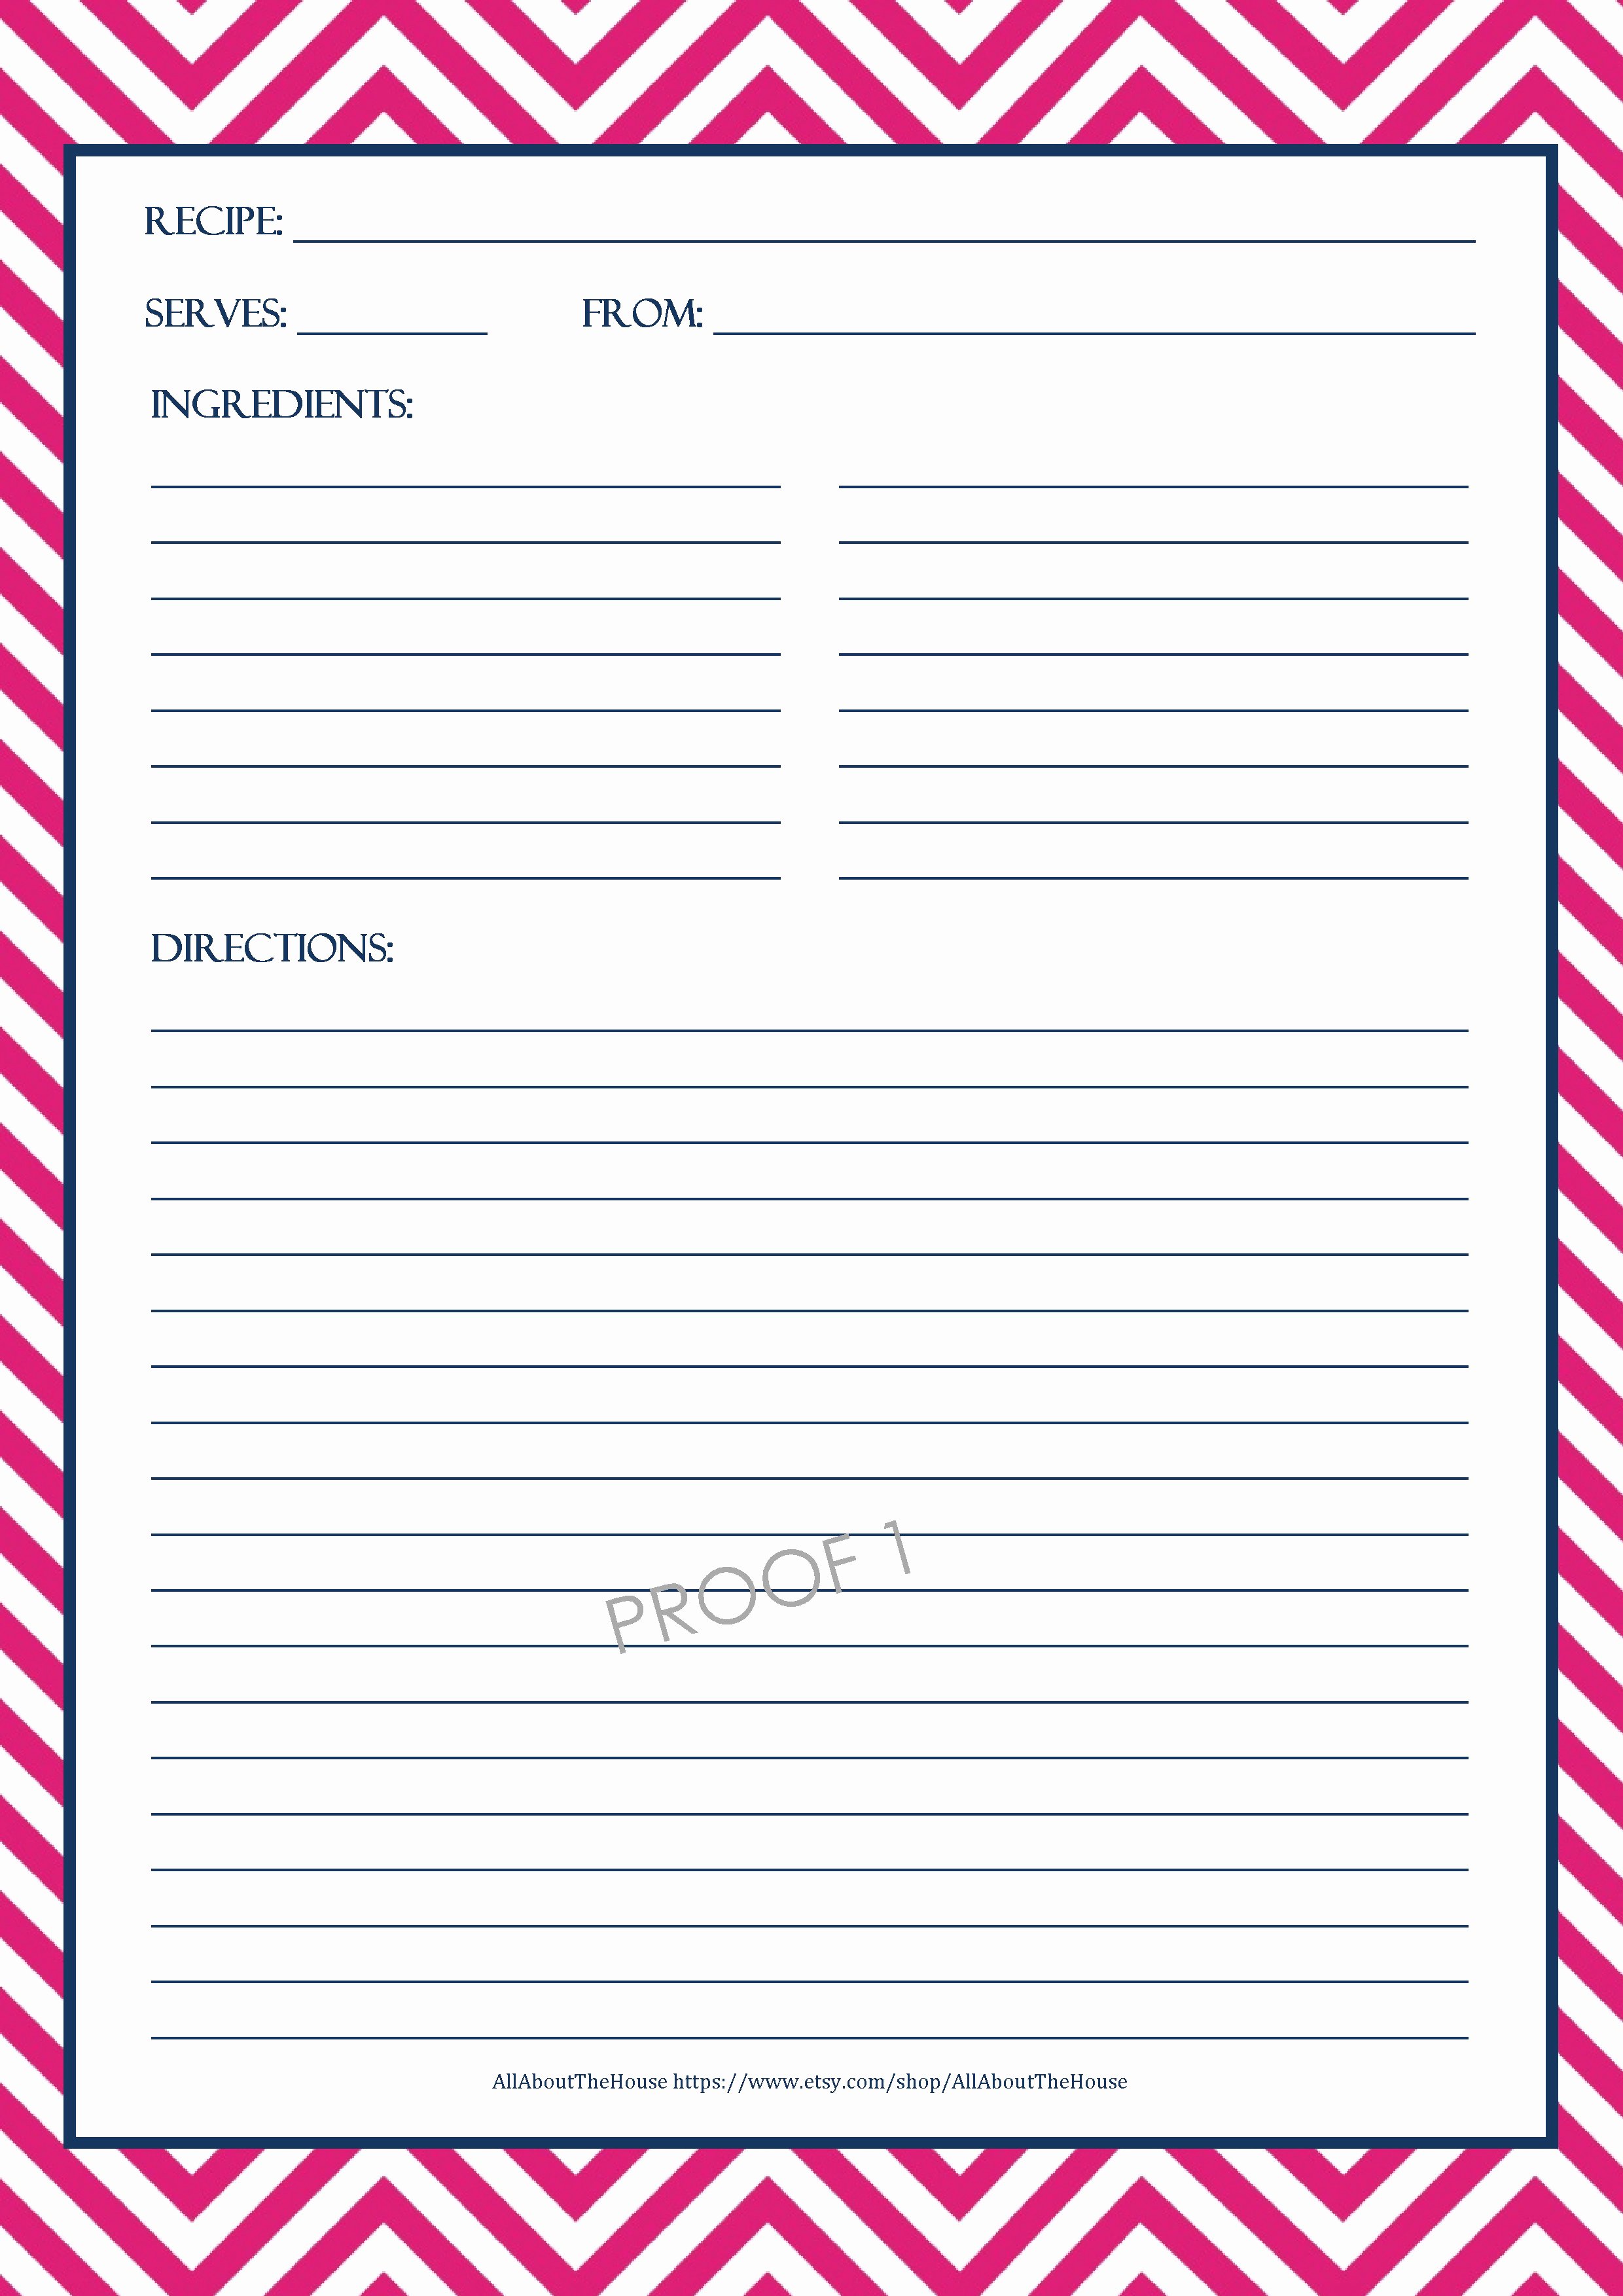 Free Printable Recipe Pages Lovely Chevron Recipe Sheet Editable